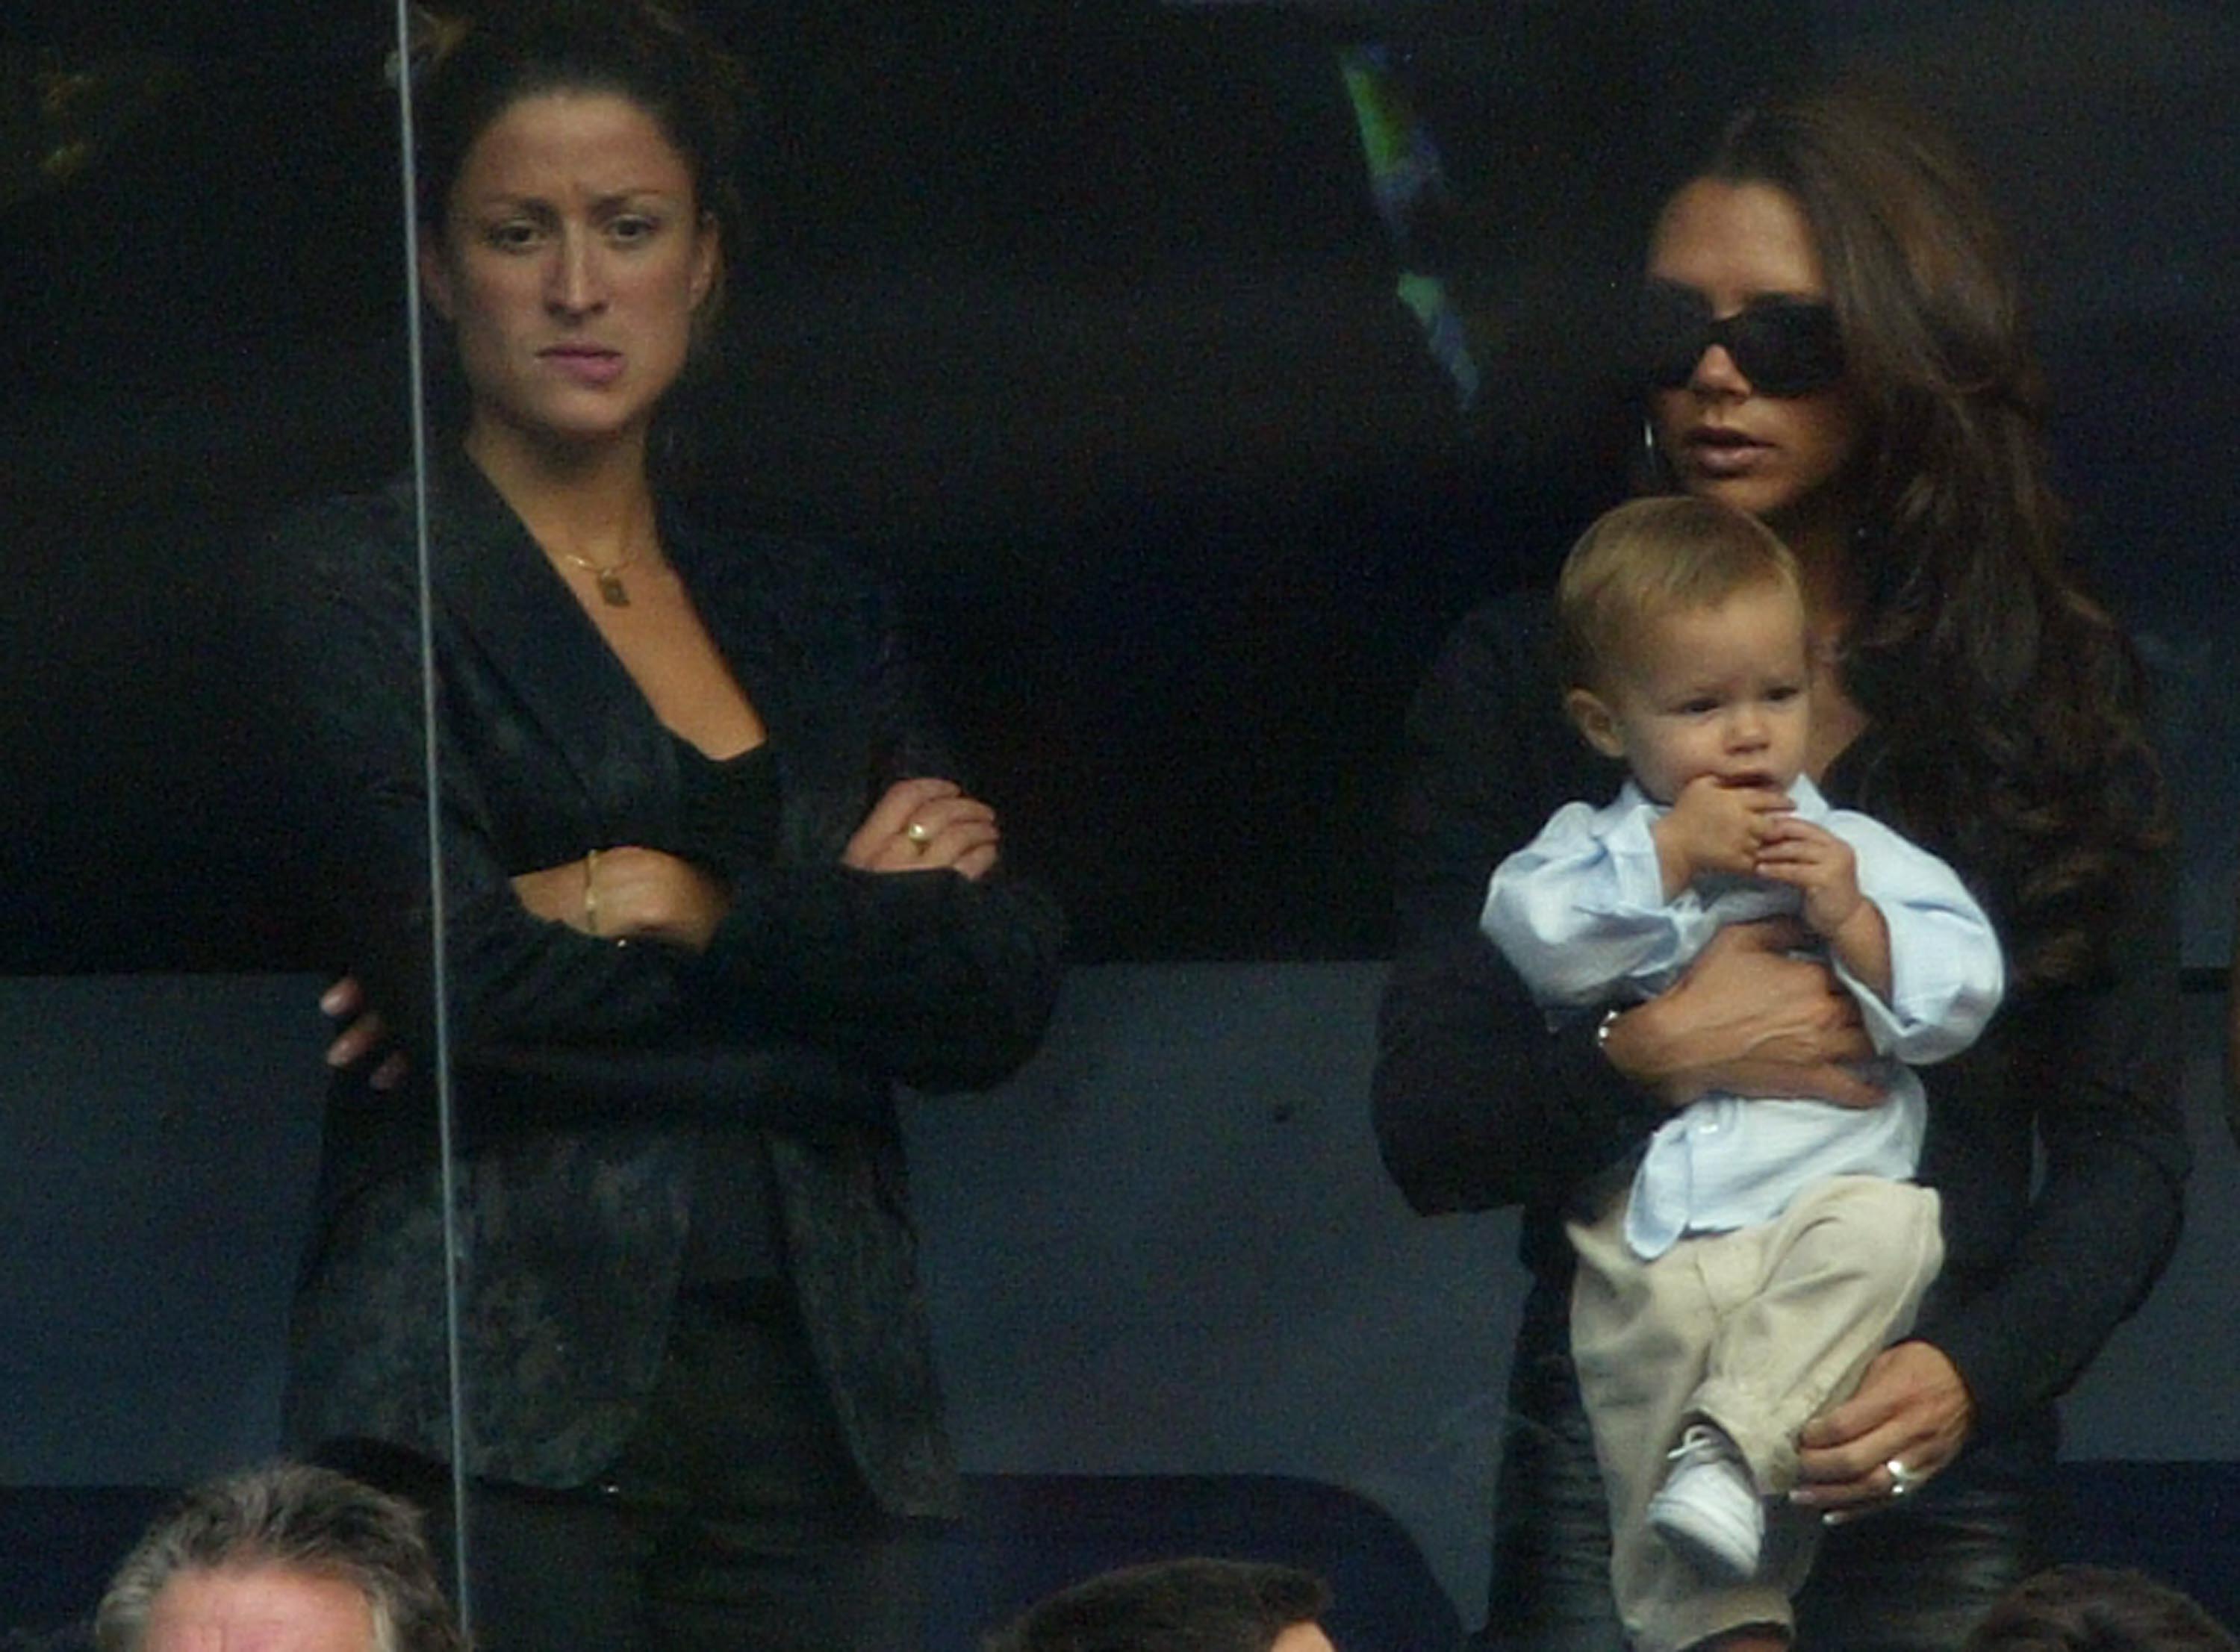 Victoria Beckham and her son Romeo in Madrid, Spain on September 13, 2003 | Source: Getty Images